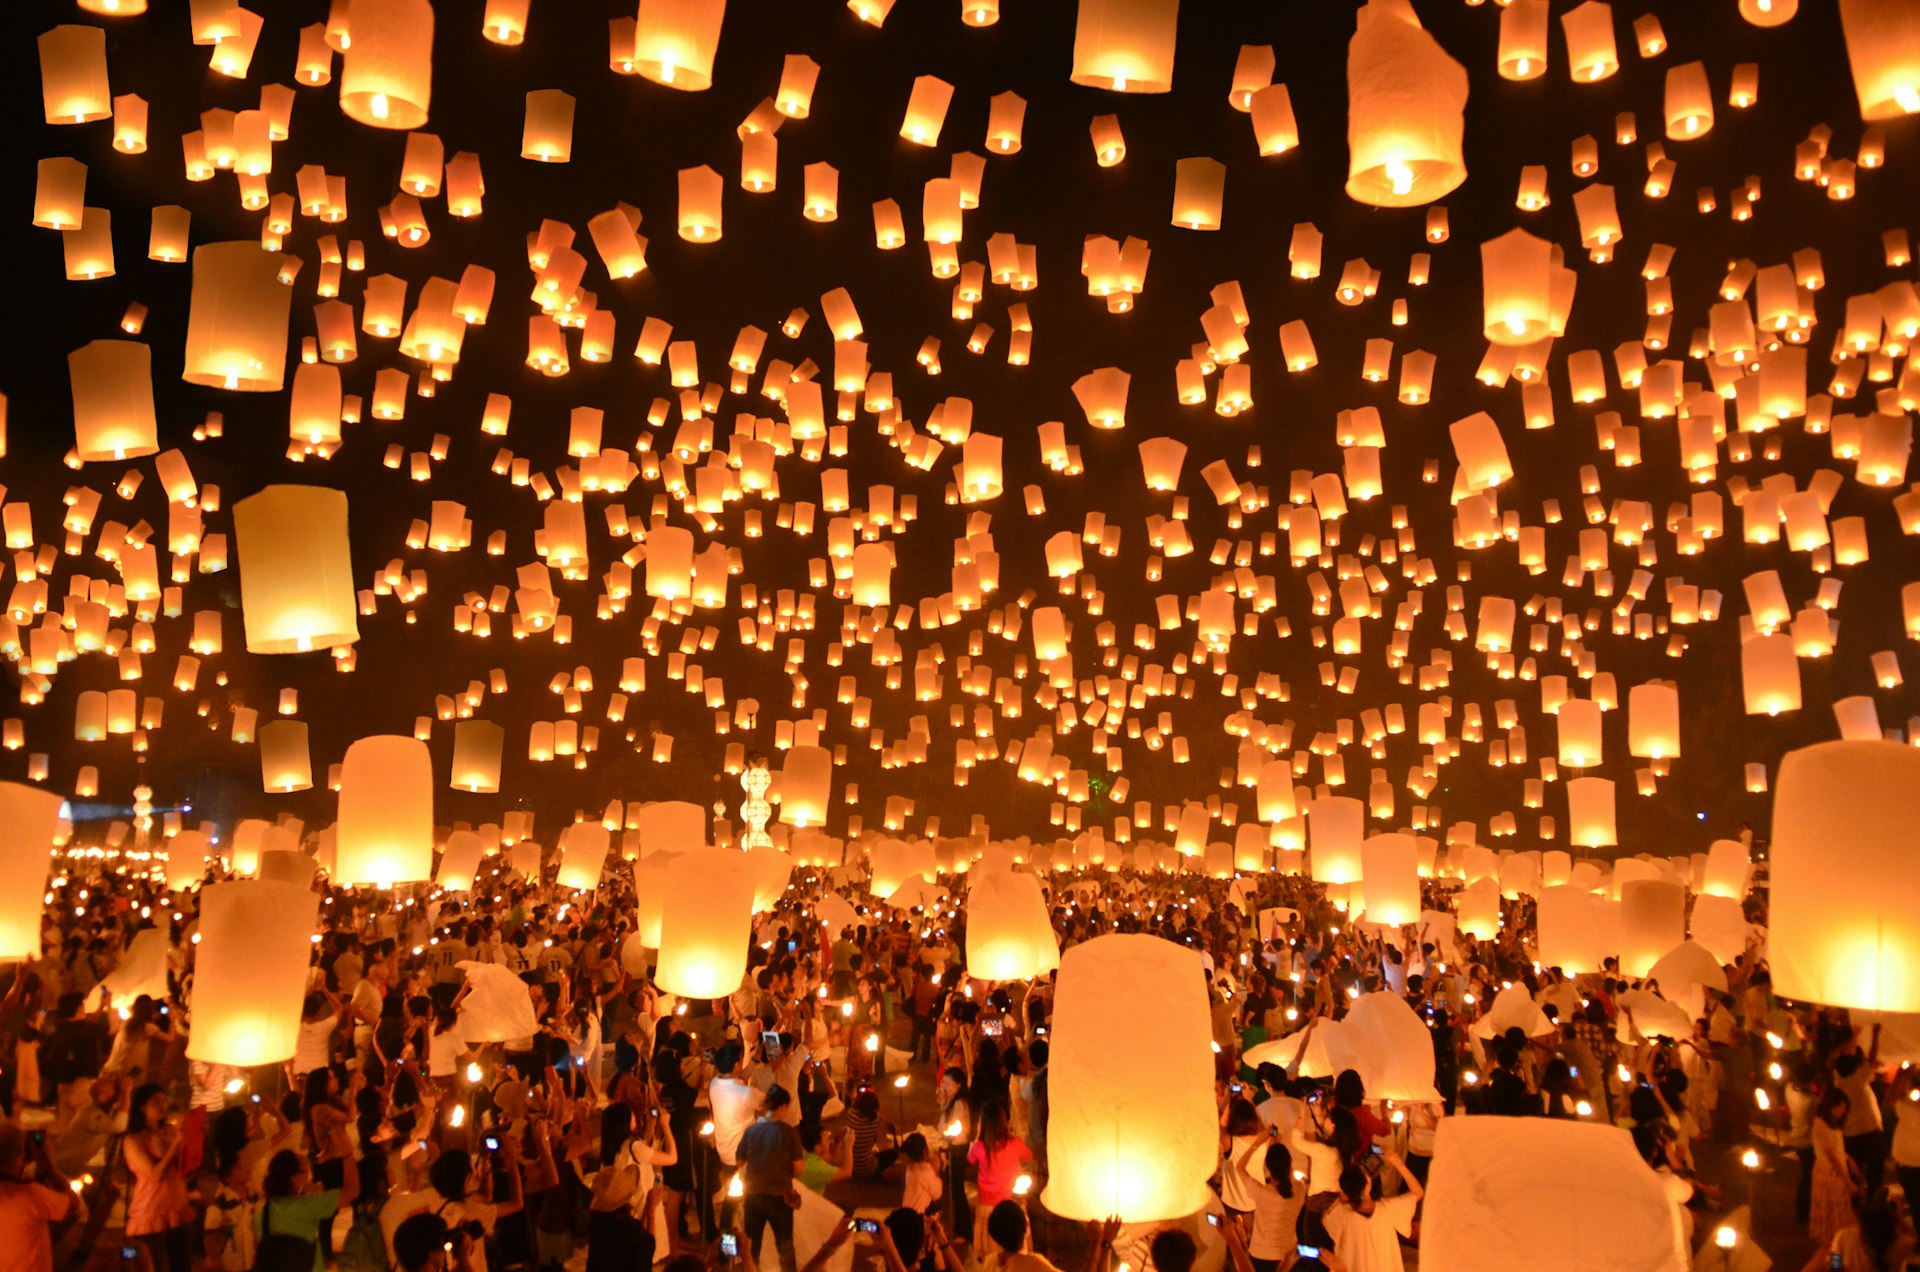 Thousands of people release lit-up paper lanterns into the night sky